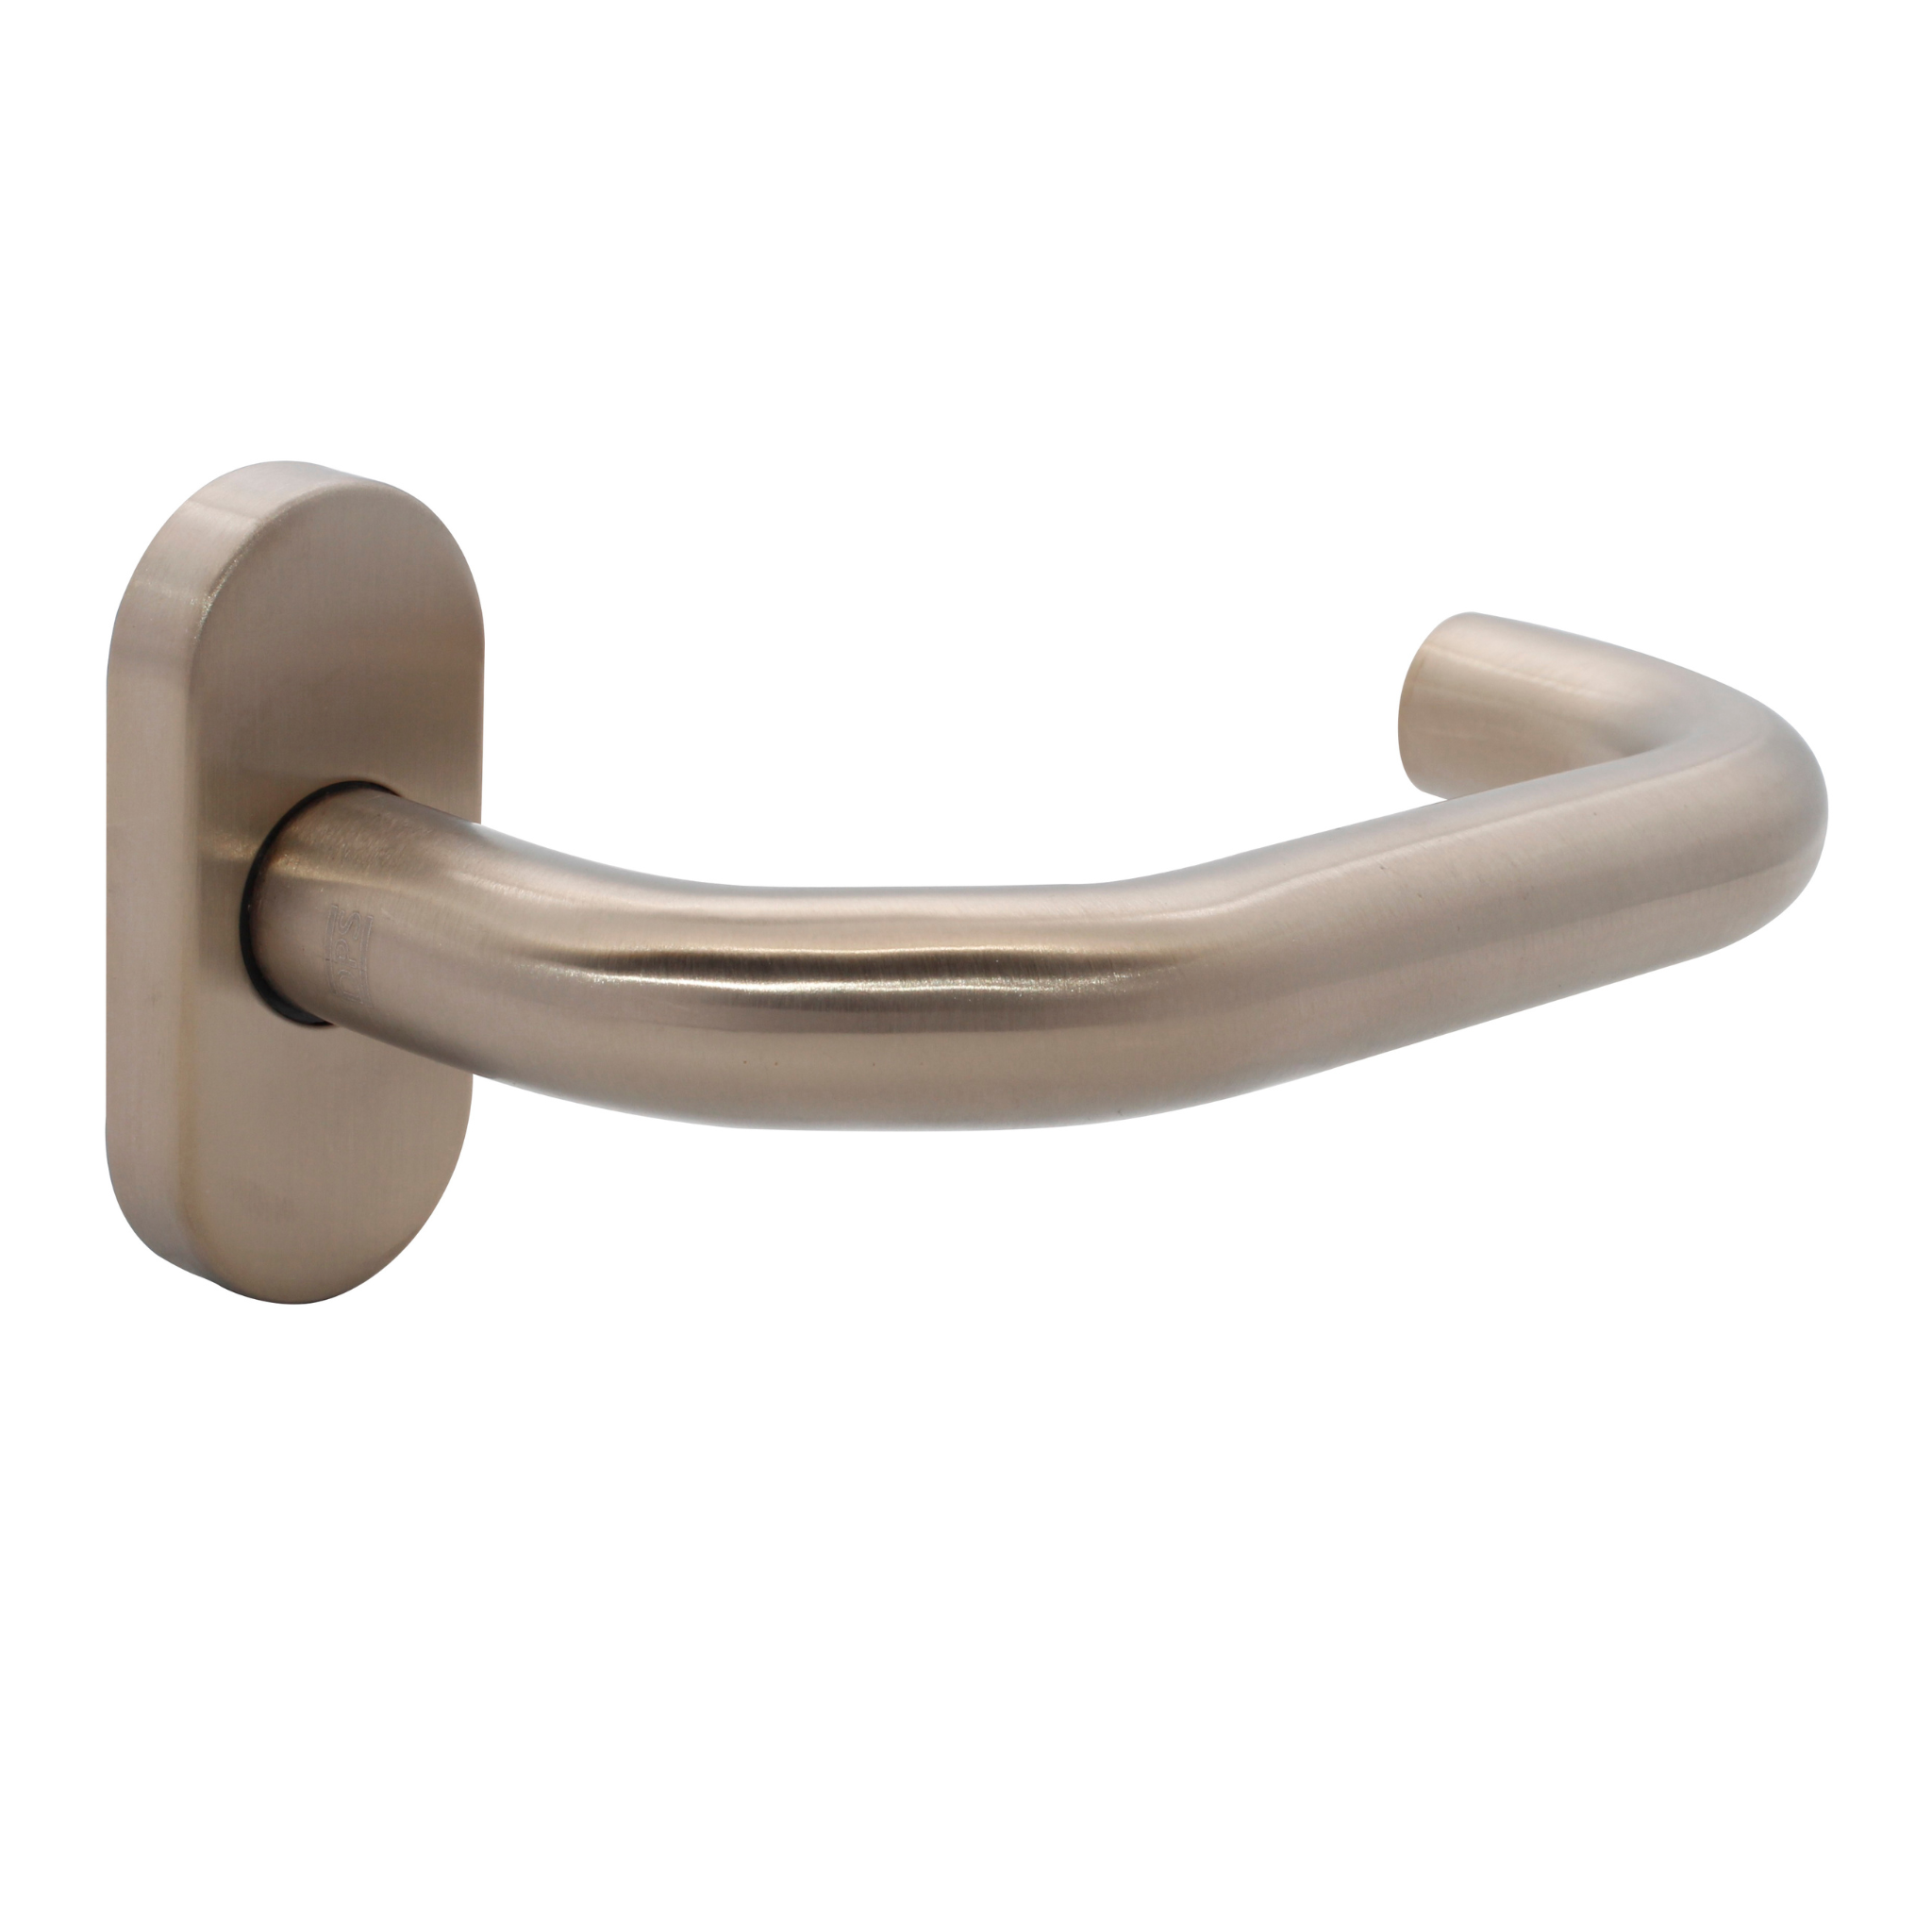 FT11.O.C.TR, Lever Handles, Tubular, On Oval Rose, With Cylinder Escutcheons, Stainless Steel with Tarnish Resistant, CISA